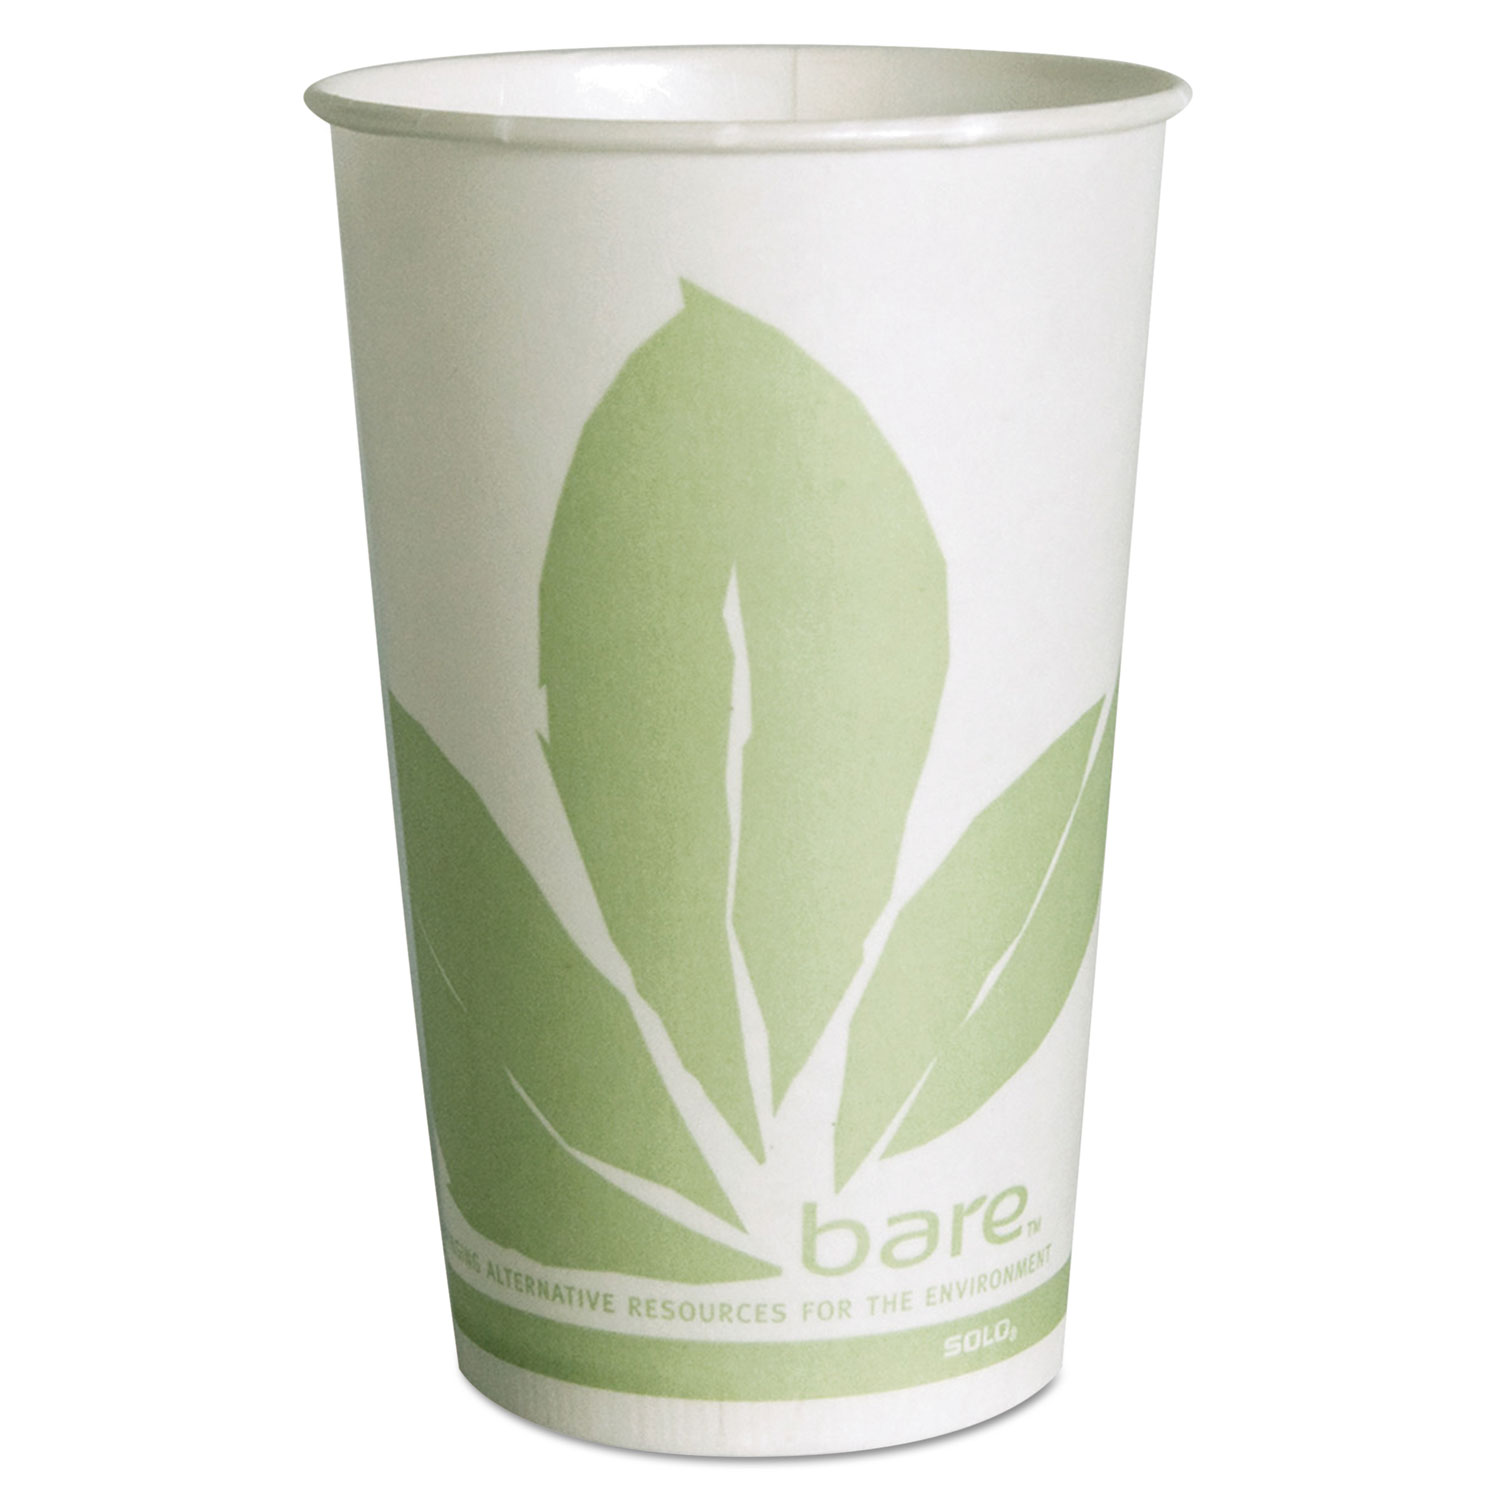  SOLO Cup Company RW16BB-JD110 Bare Eco-Forward Treated Paper Cold Cups, 16 oz, Green/White, 100/Sleeve 10 Sleeves/Carton (SCCRW16BBD110CT) 